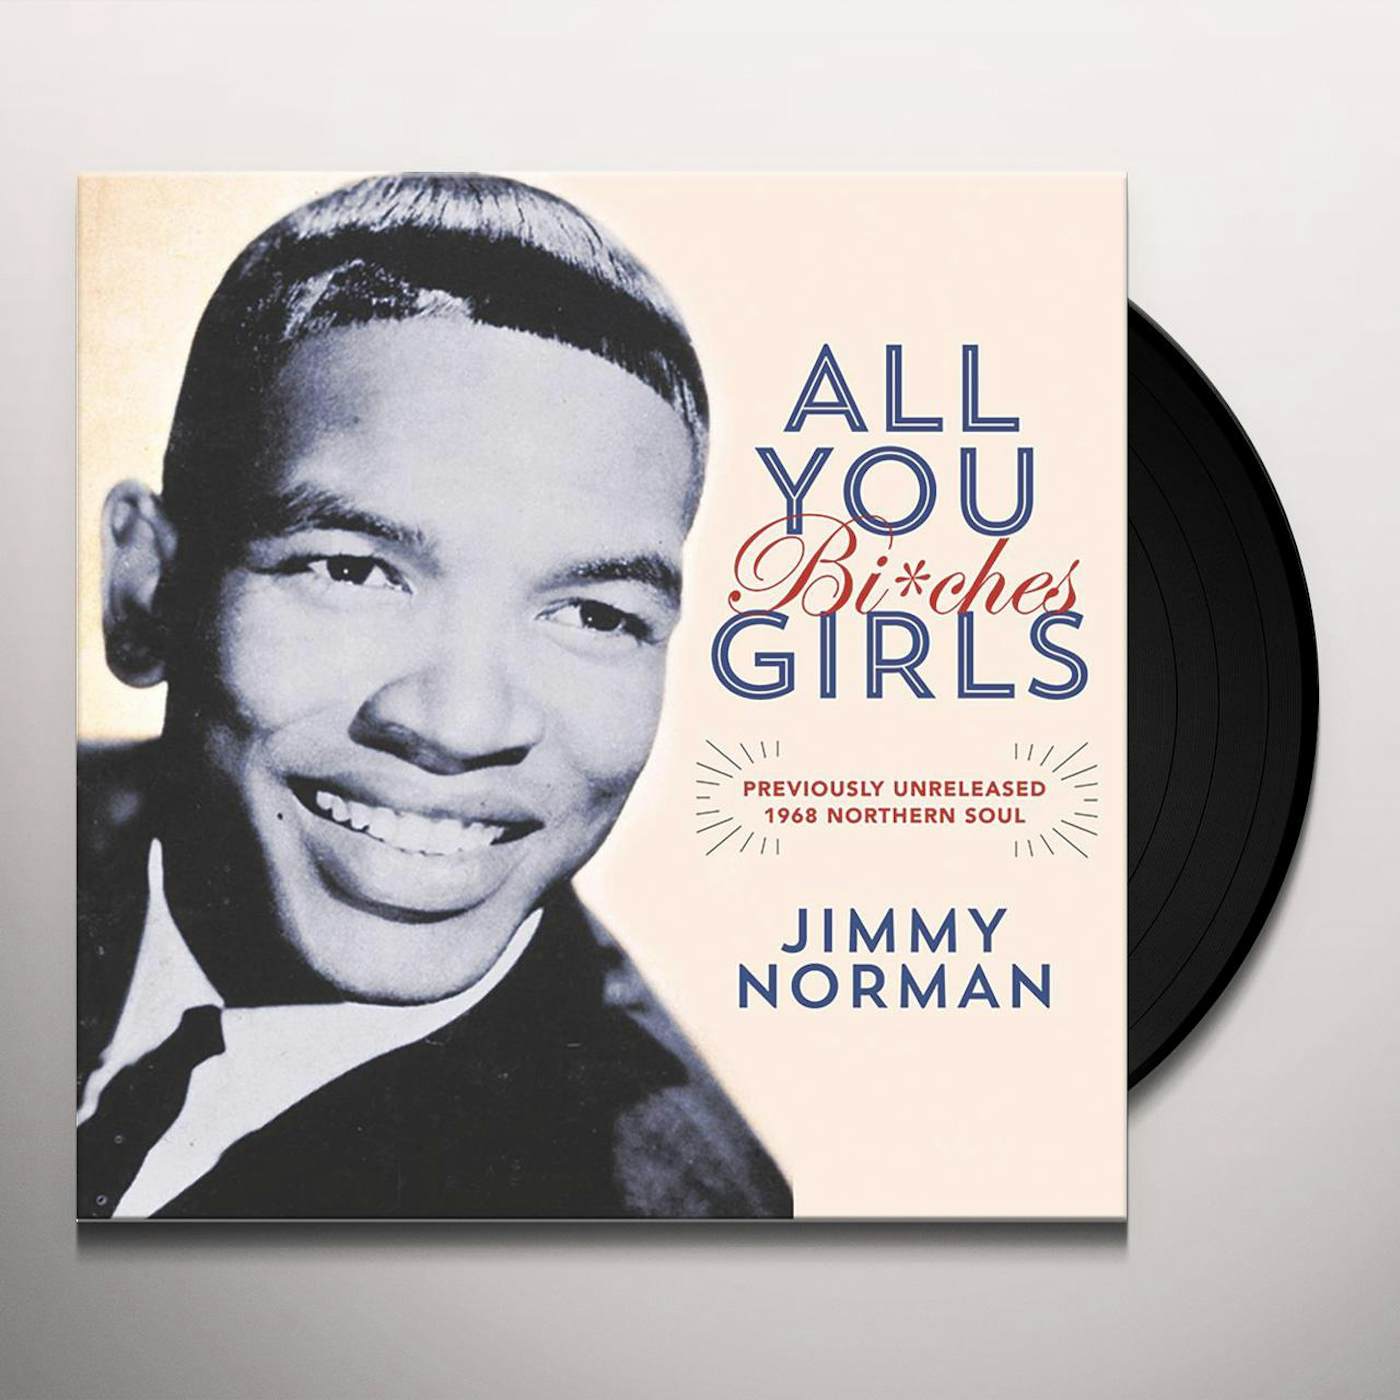 Jimmy Norman All You Girls (Bi*ches) / It's Beautiful When You're Falling In Love (7" Single) Vinyl Record